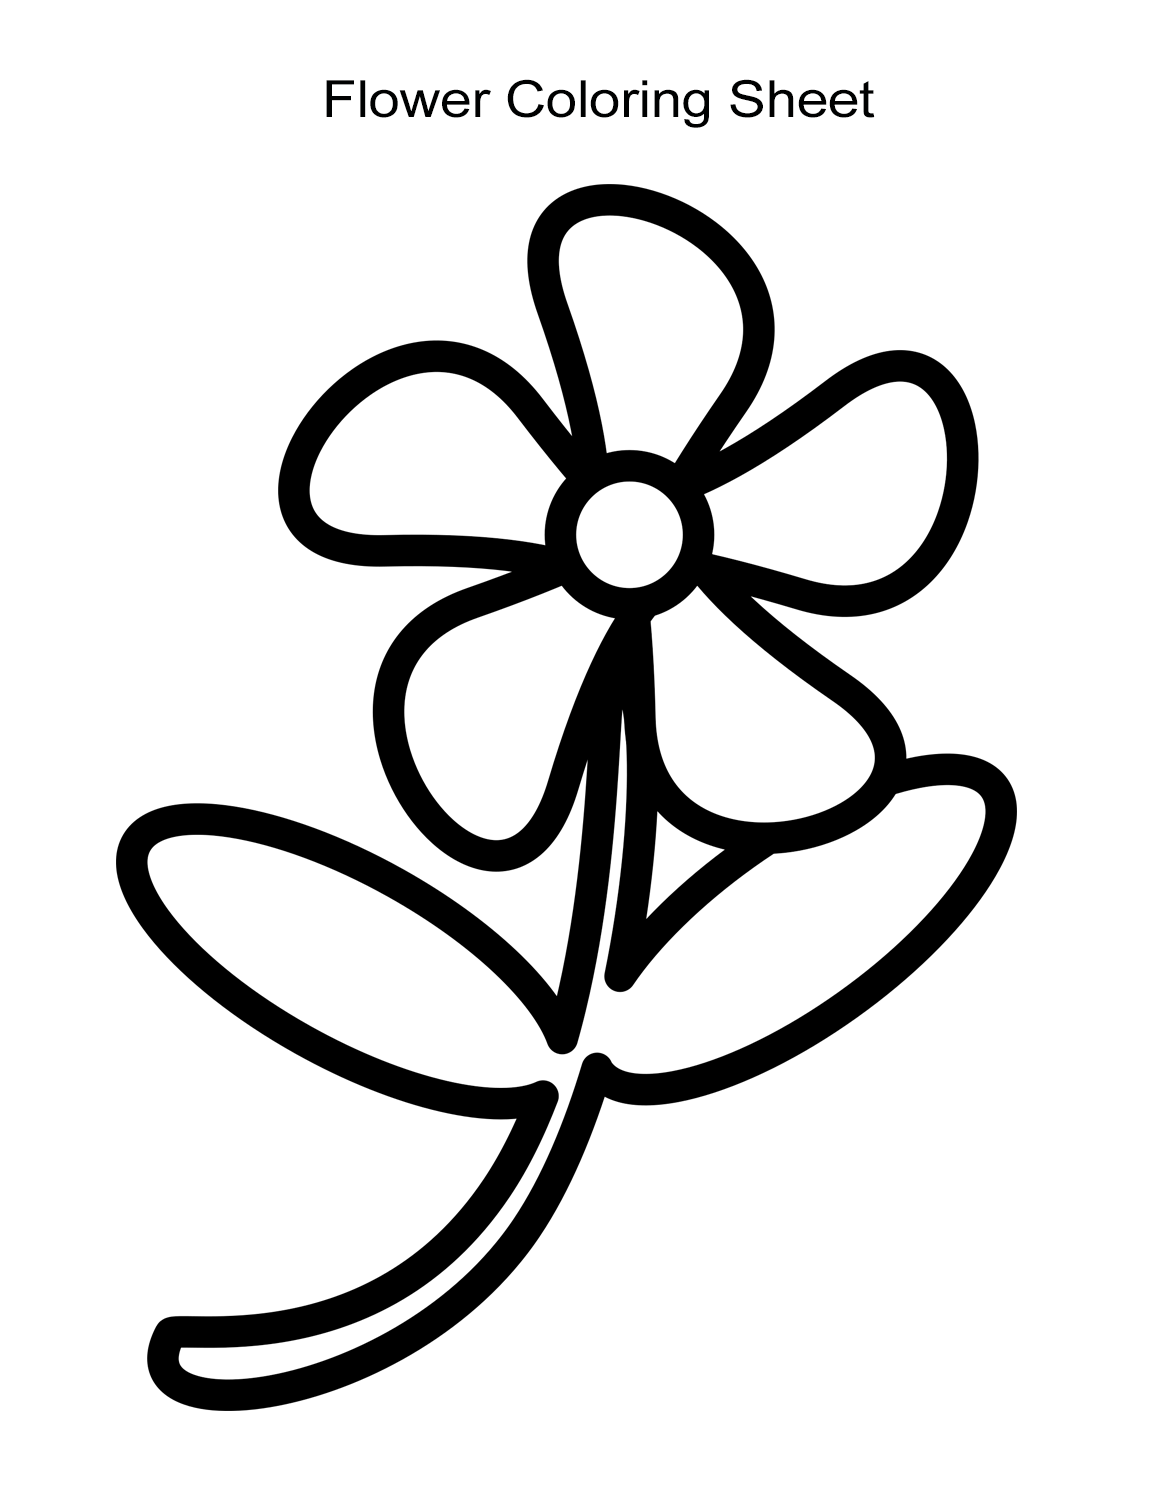 10 Flower Coloring Sheets for Girls and Boys ALL ESL